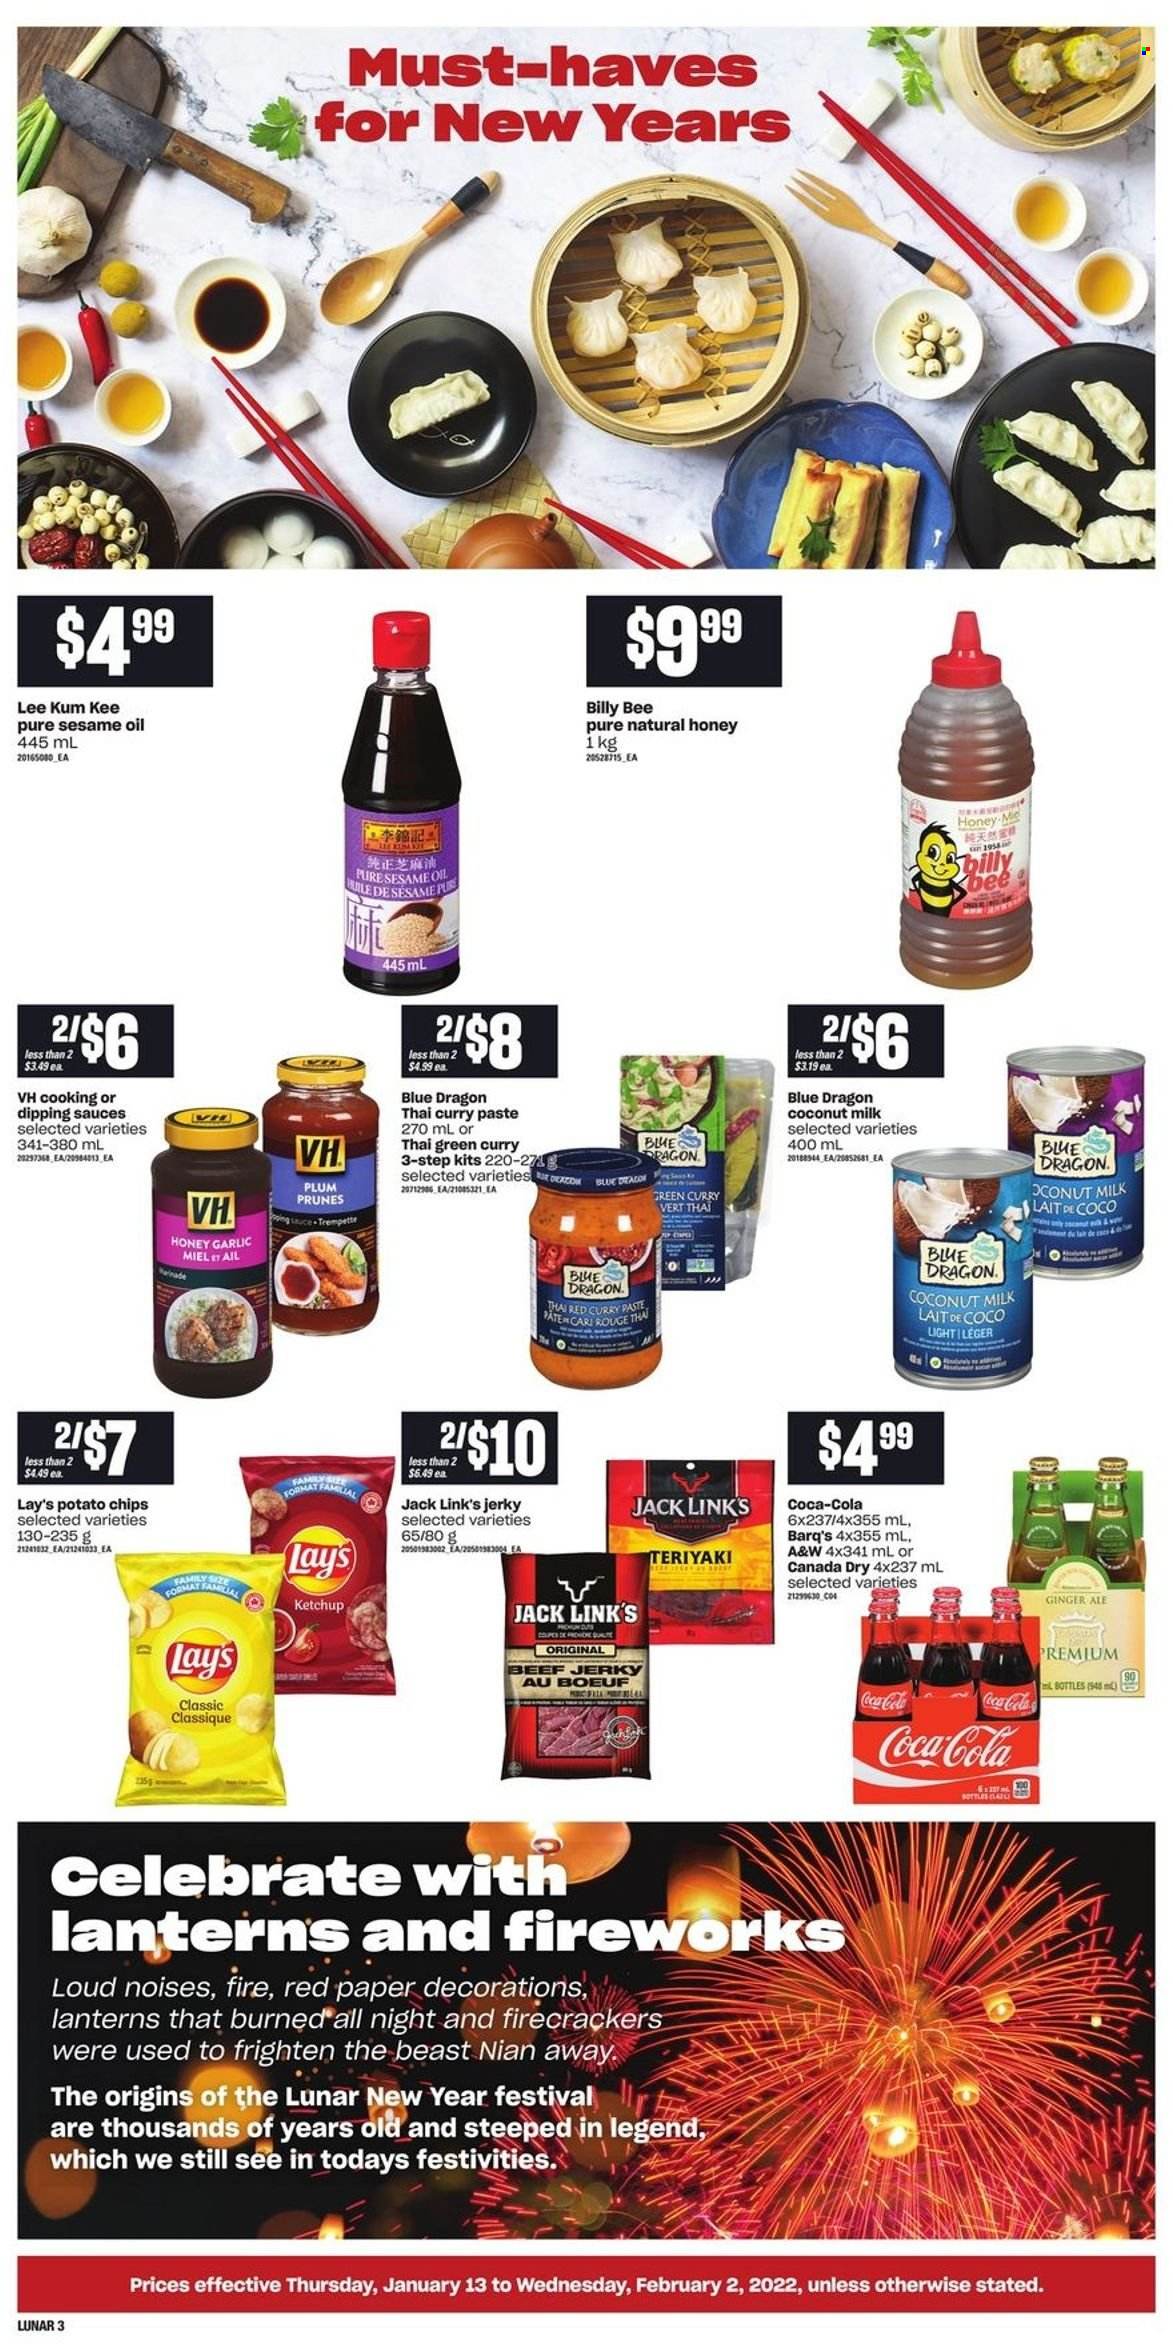 thumbnail - Loblaws Flyer - January 13, 2022 - February 02, 2022 - Sales products - garlic, red curry, beef jerky, jerky, potato chips, Lay’s, Jack Link's, coconut milk, curry paste, Lee Kum Kee, sesame oil, oil, honey, prunes, dried fruit, Canada Dry, Coca-Cola, ginger ale, A&W, ketchup, chips. Page 3.